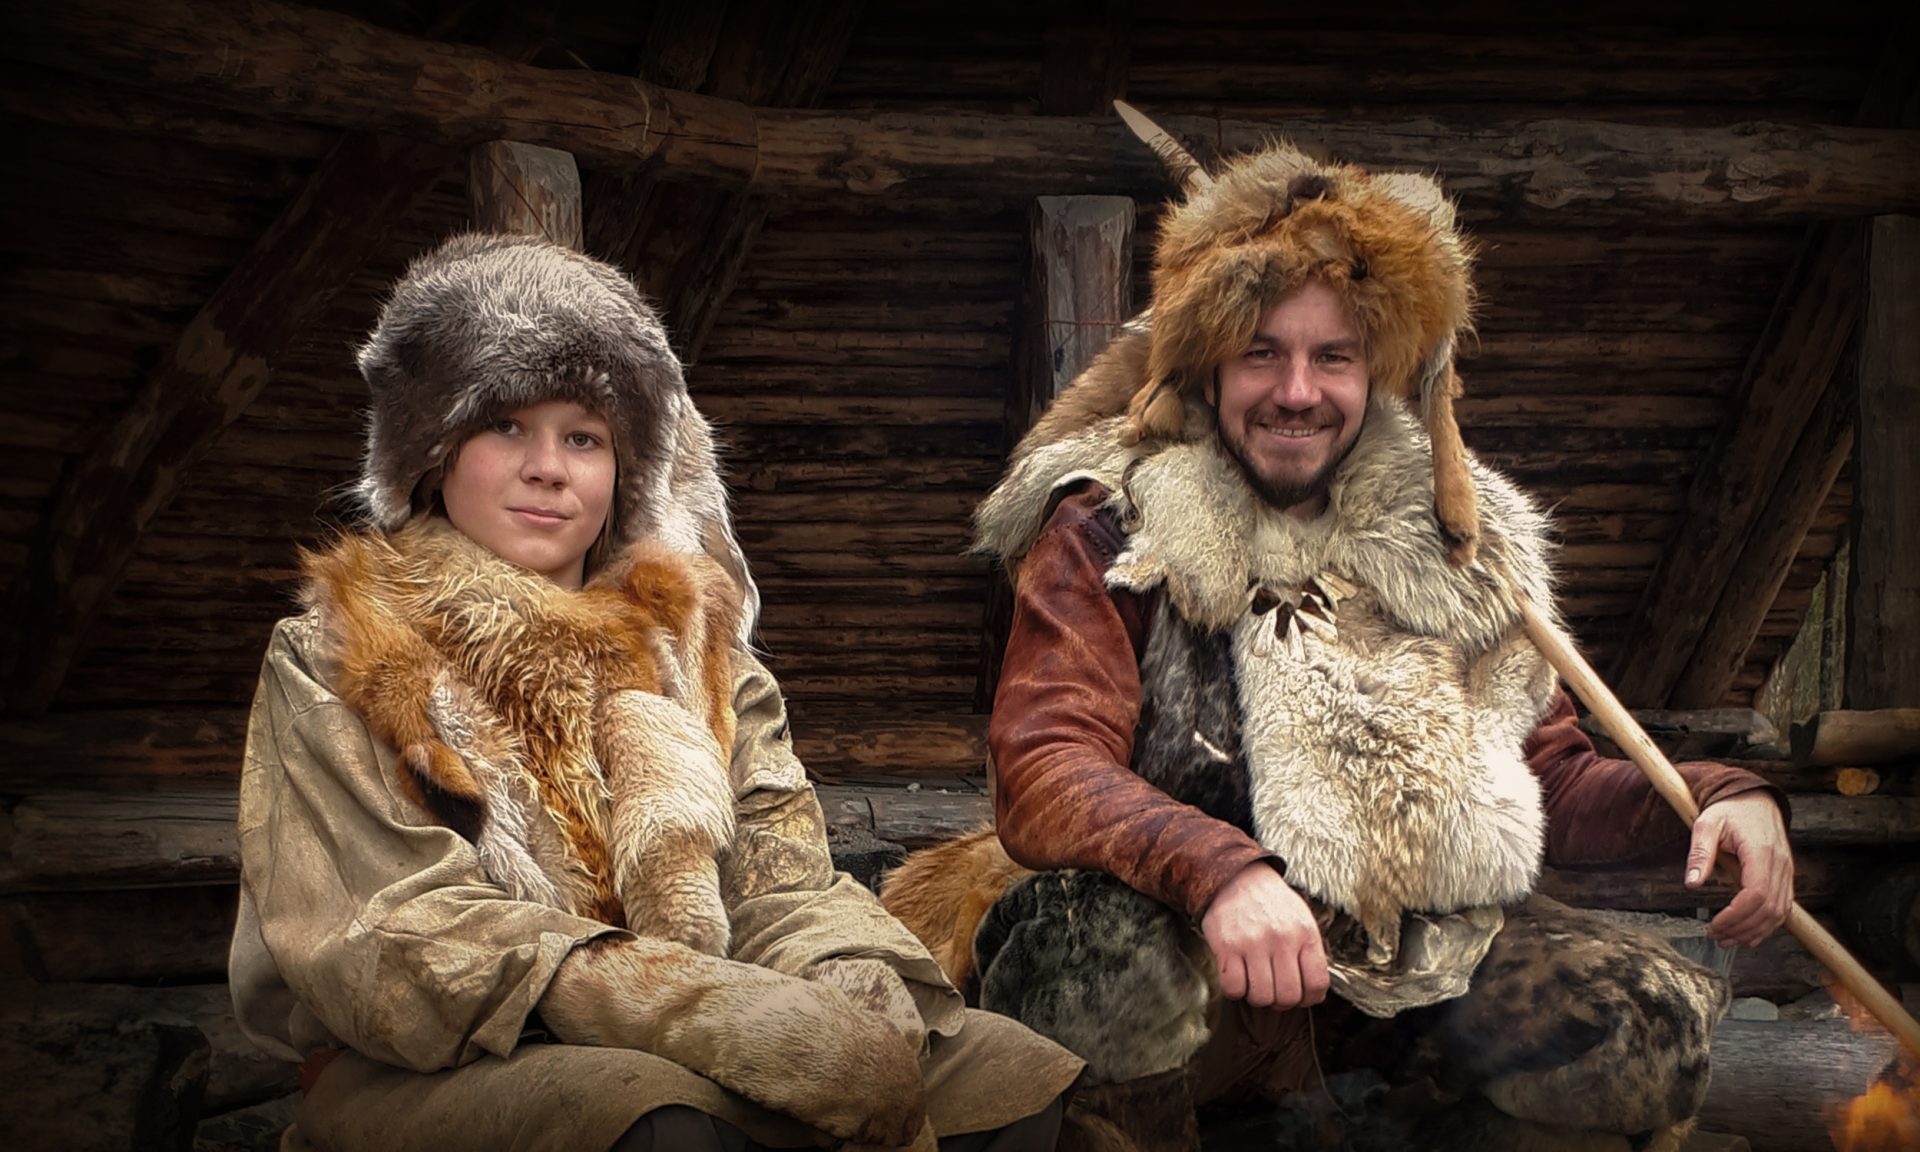 A man and a boy dressed in Stone Age costumes are sitting outside by an open roof.